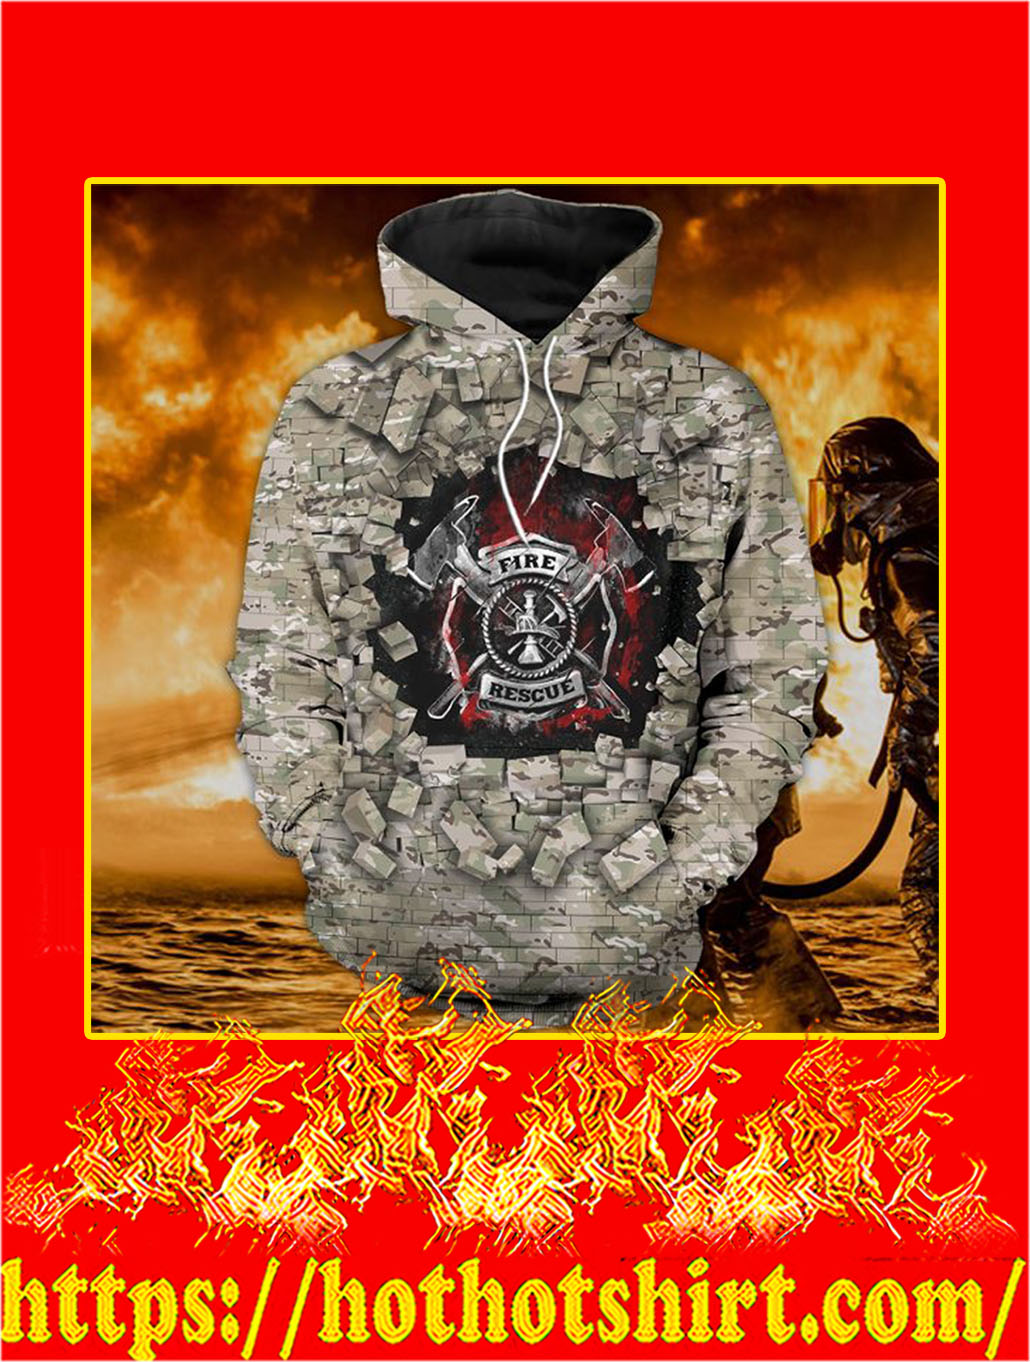 3D Printed Firefighter Camo Wall Clothing Hoodie, T-shirt and Sweatshirt